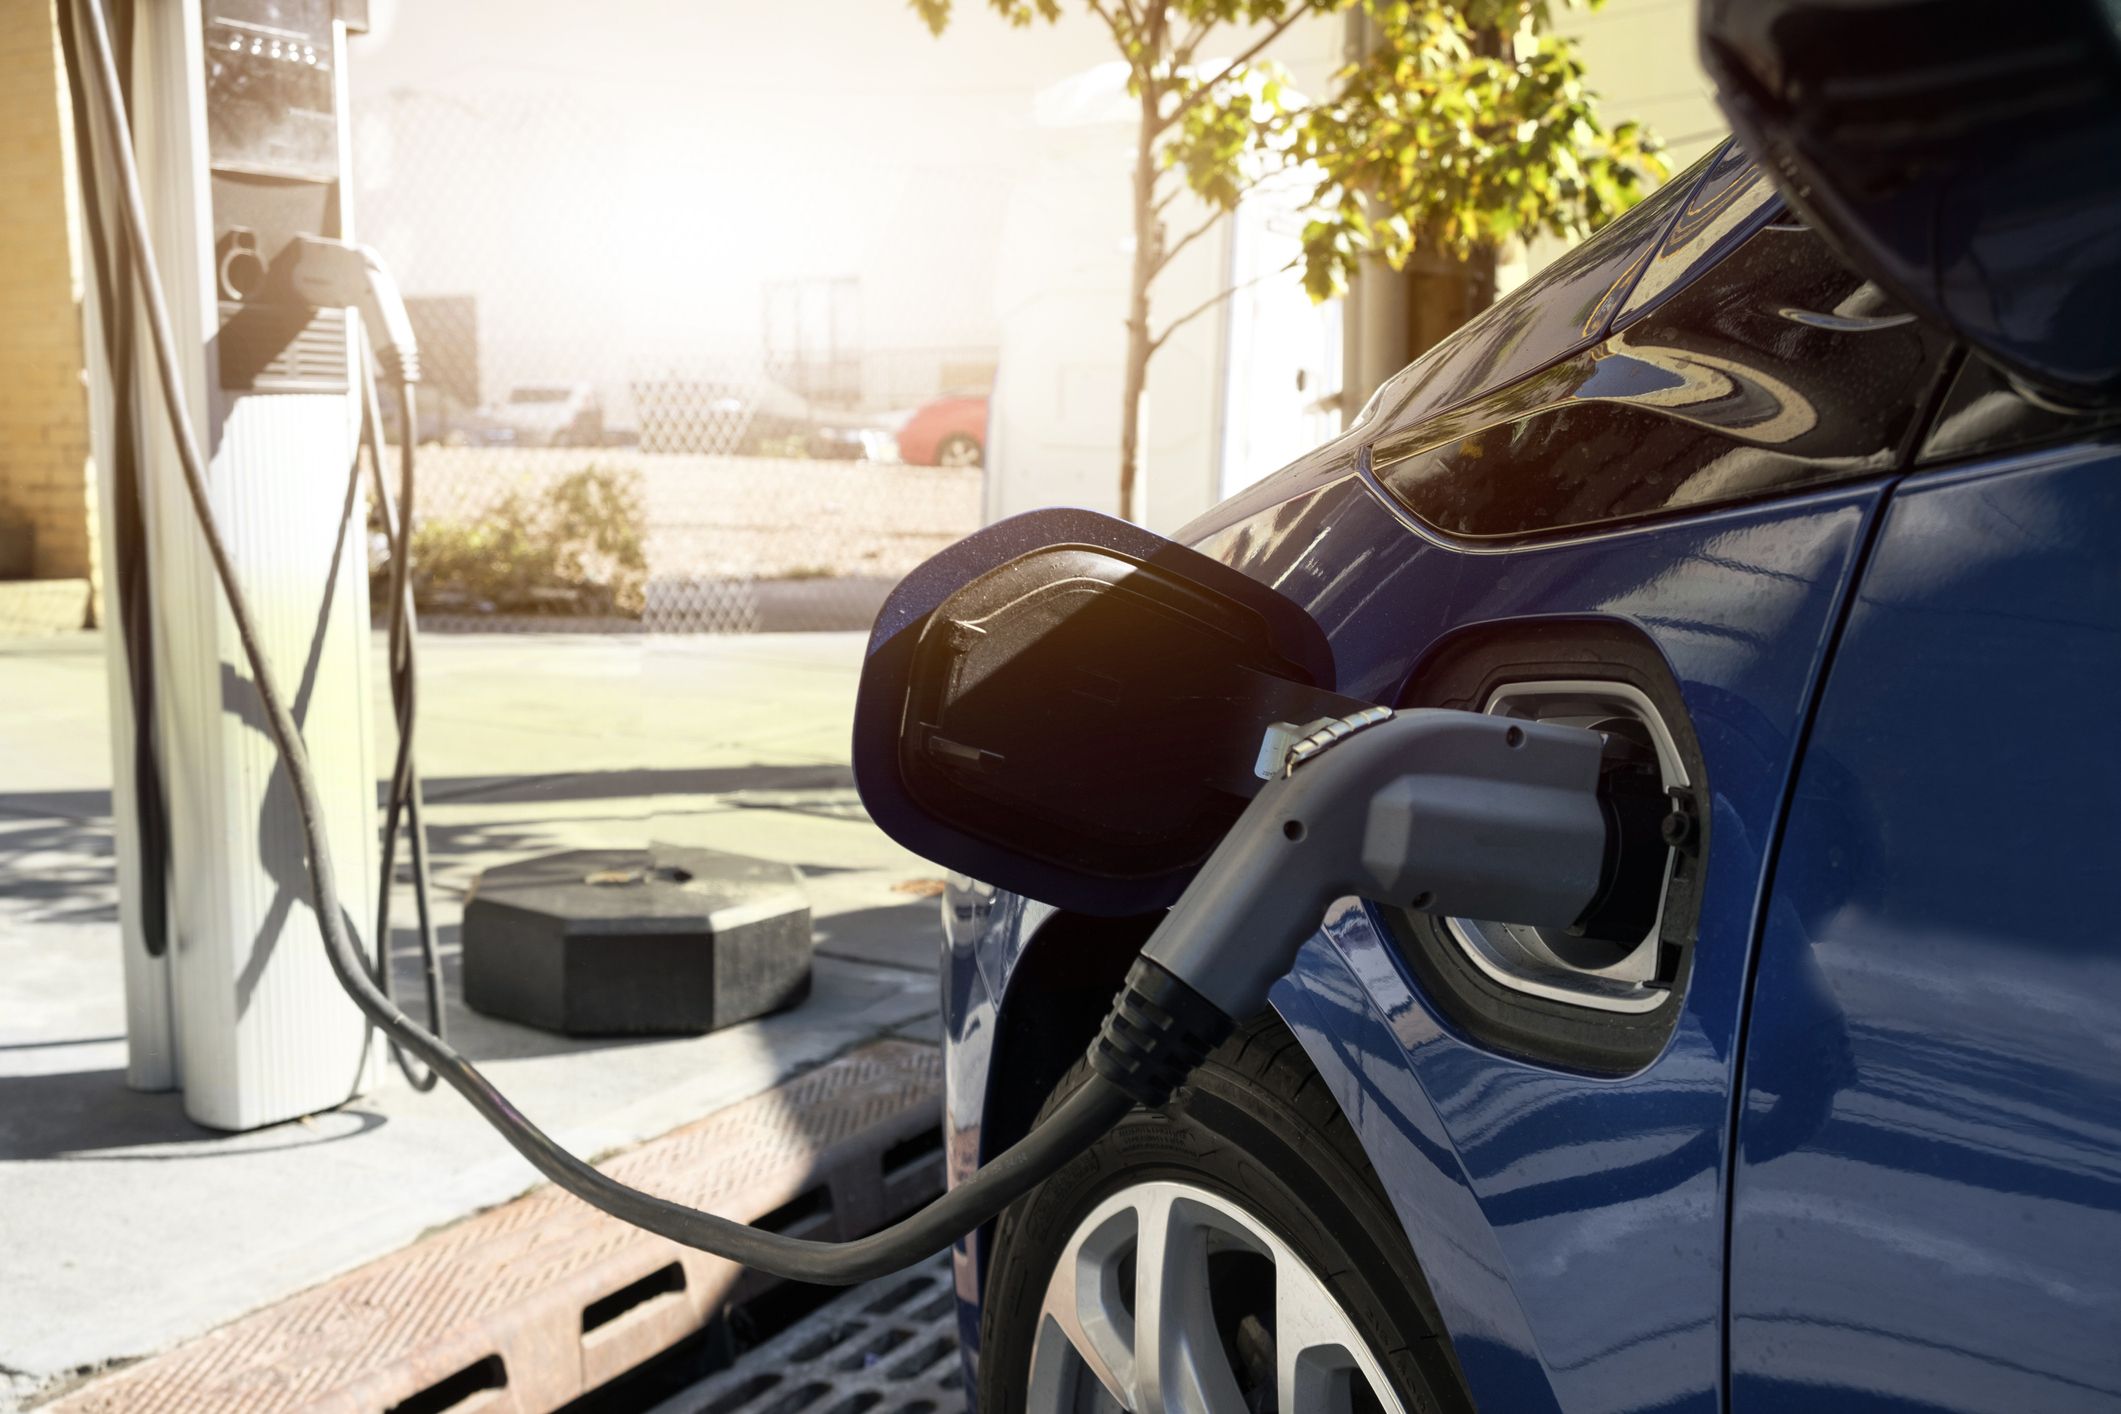 GAS vs. EVS: What are Automobiles Made of?